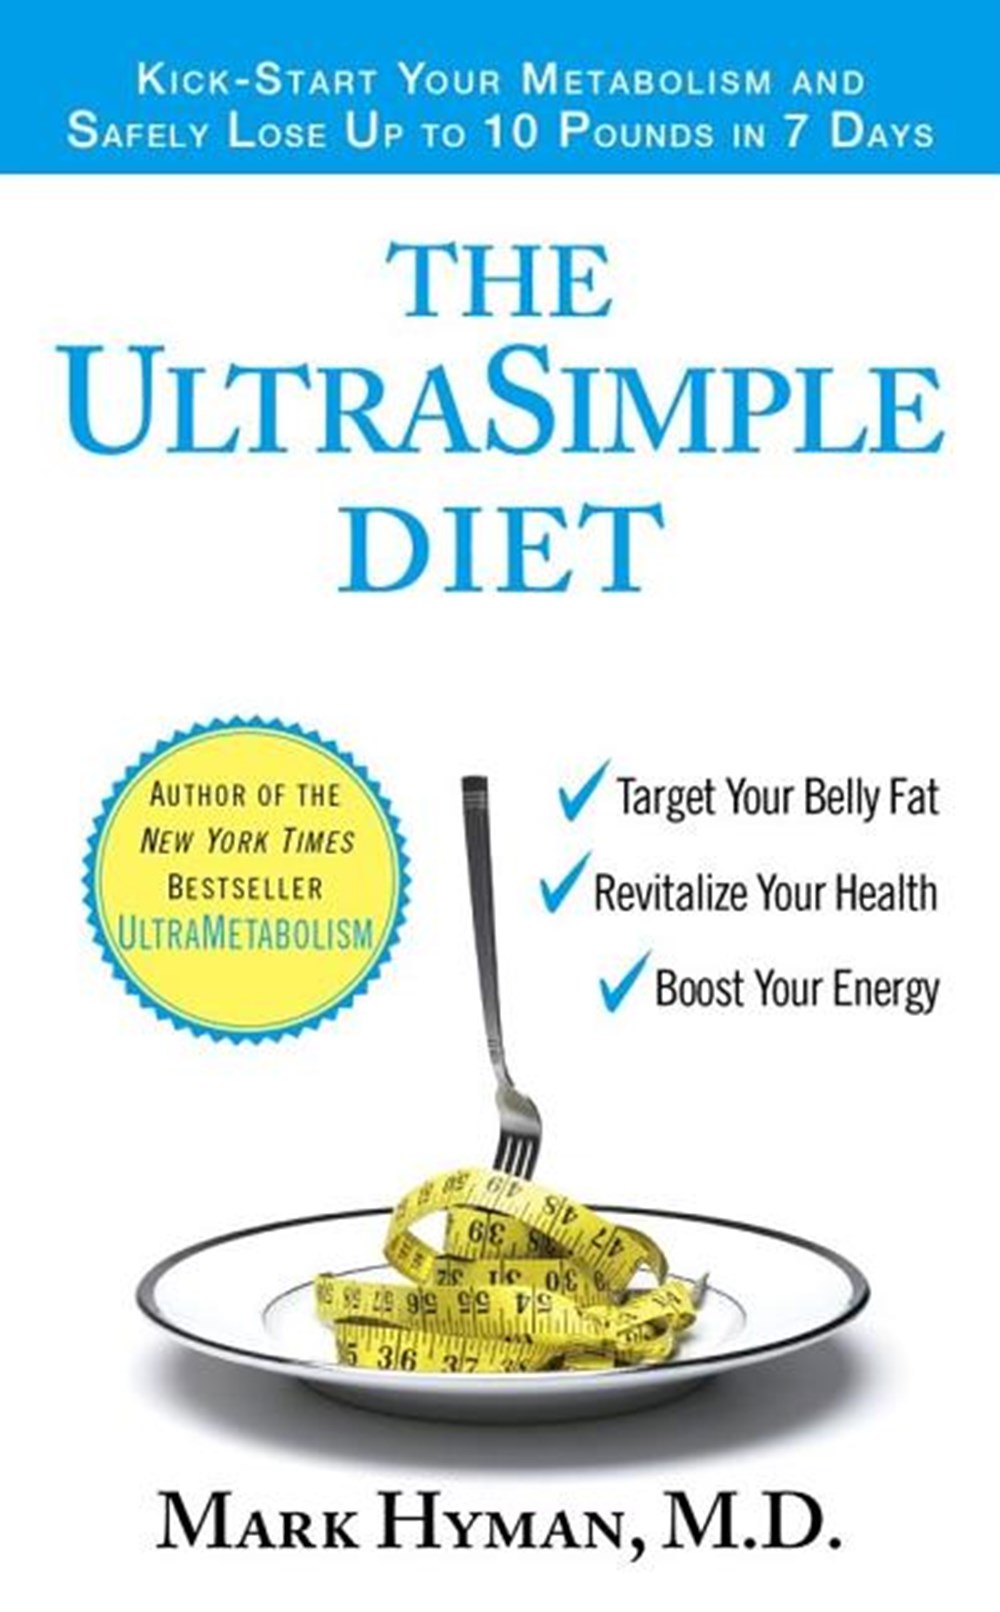 Ultrasimple Diet: Kick-Start Your Metabolism and Safely Lose Up to 10 Pounds in 7 Days